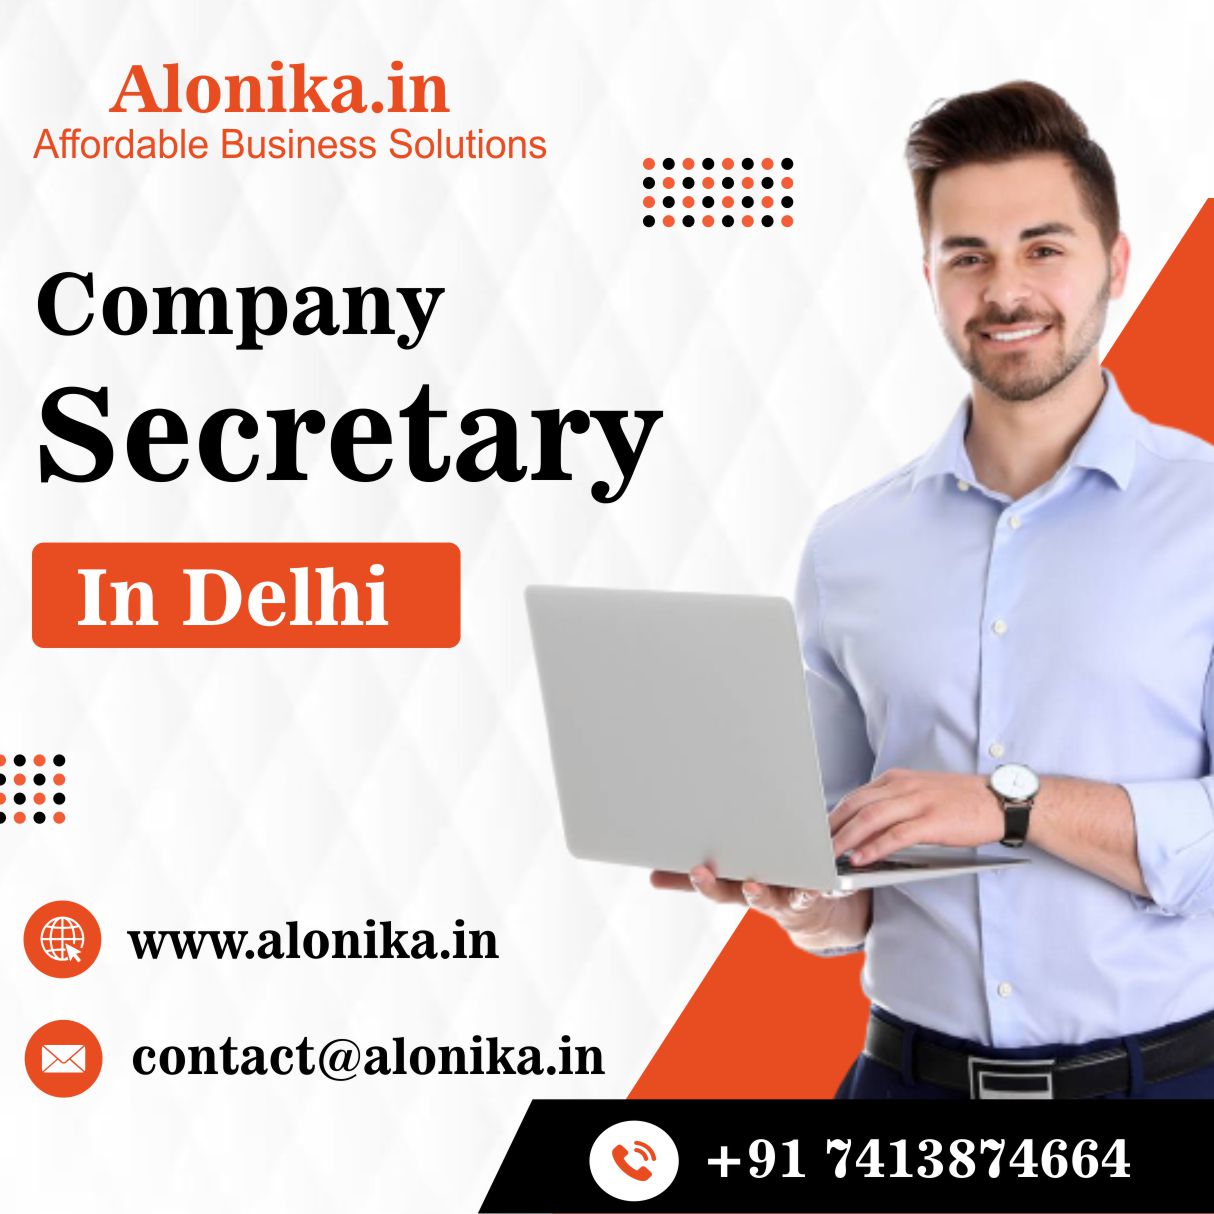 What are the key responsibilities and roles offered by your company secretary services in Delhi?